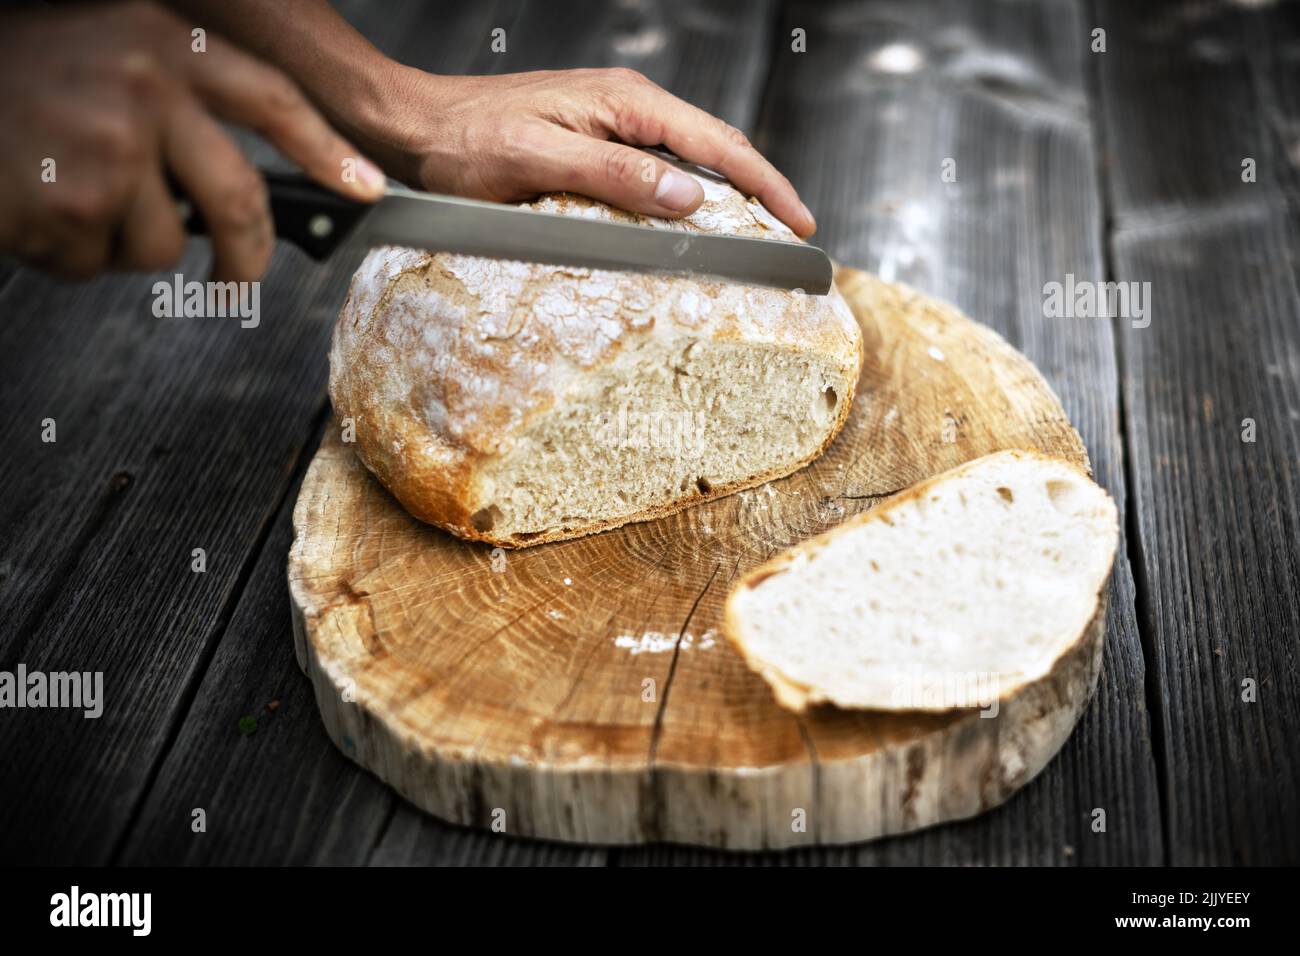 Traditional leavened sourdough bread cut into slice on a rustic wooden table. Healthy food photography Stock Photo